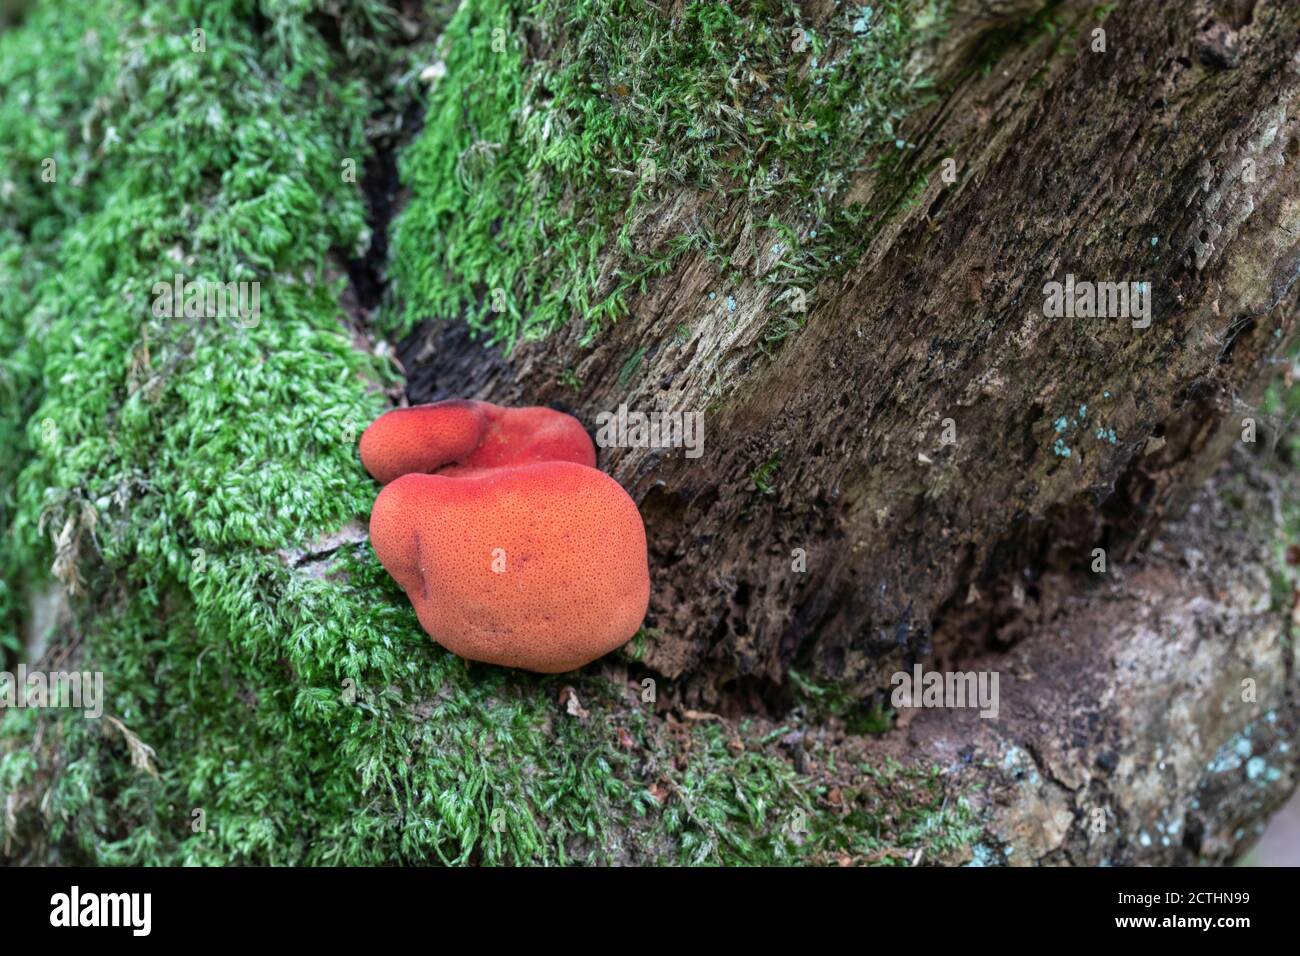 Close up of Beefsteak Fungus / Ox tongue fungus / Fistulina hepatica a bracket fungi growing in woodland in September in England, UK Stock Photo